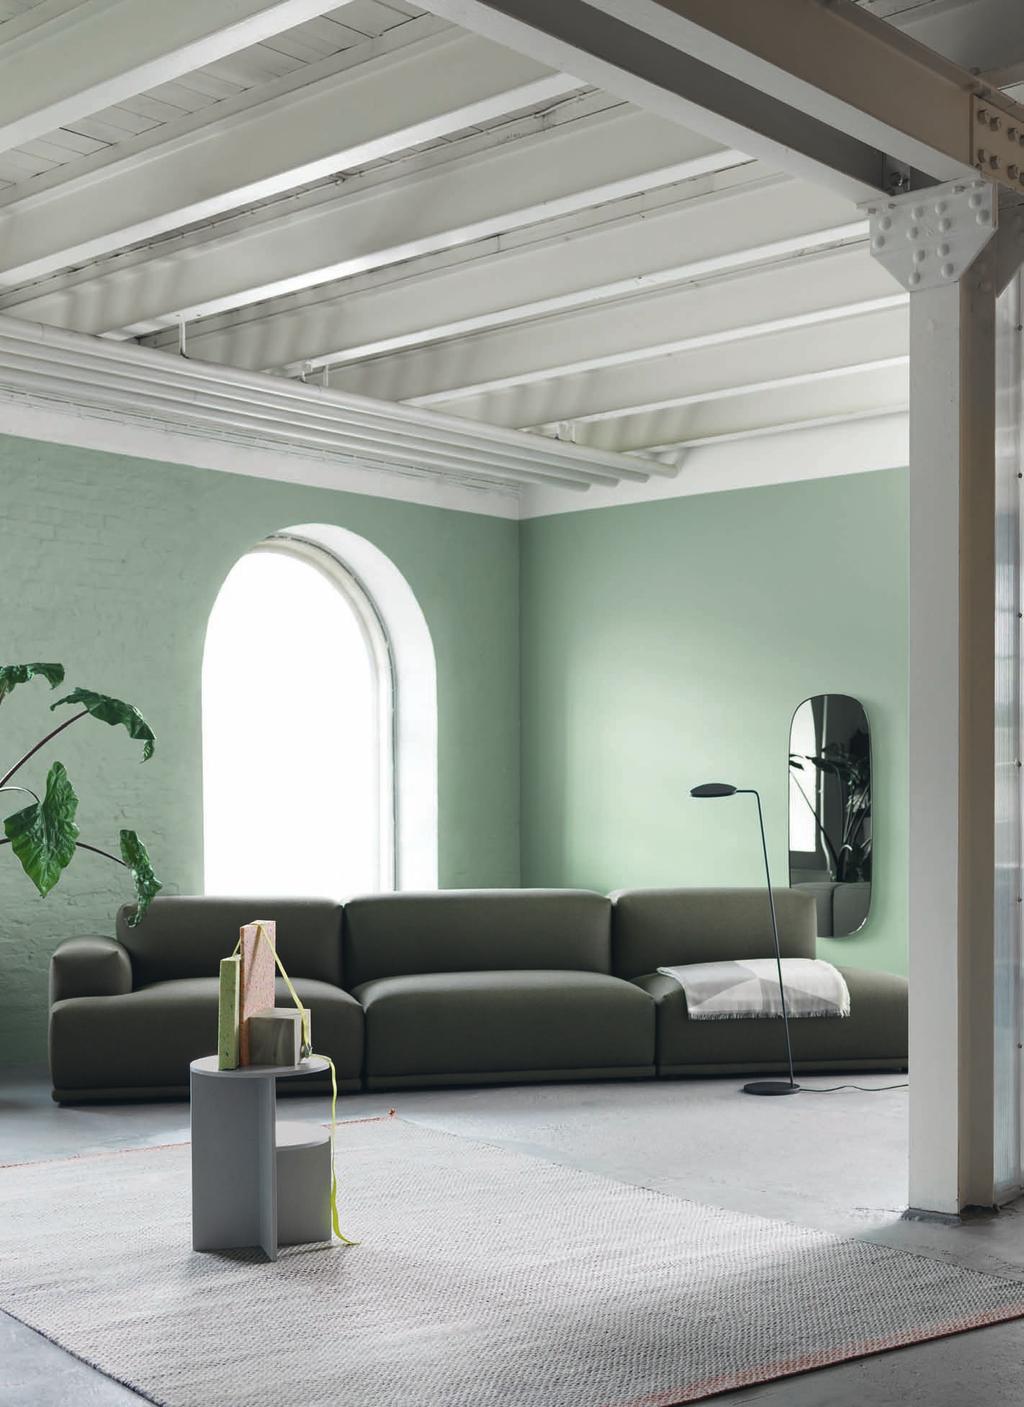 10 HALVES SIDE TABLE by MSDS p. 49 CONNECT MODULAR SOFA by Anderssen & Voll p.